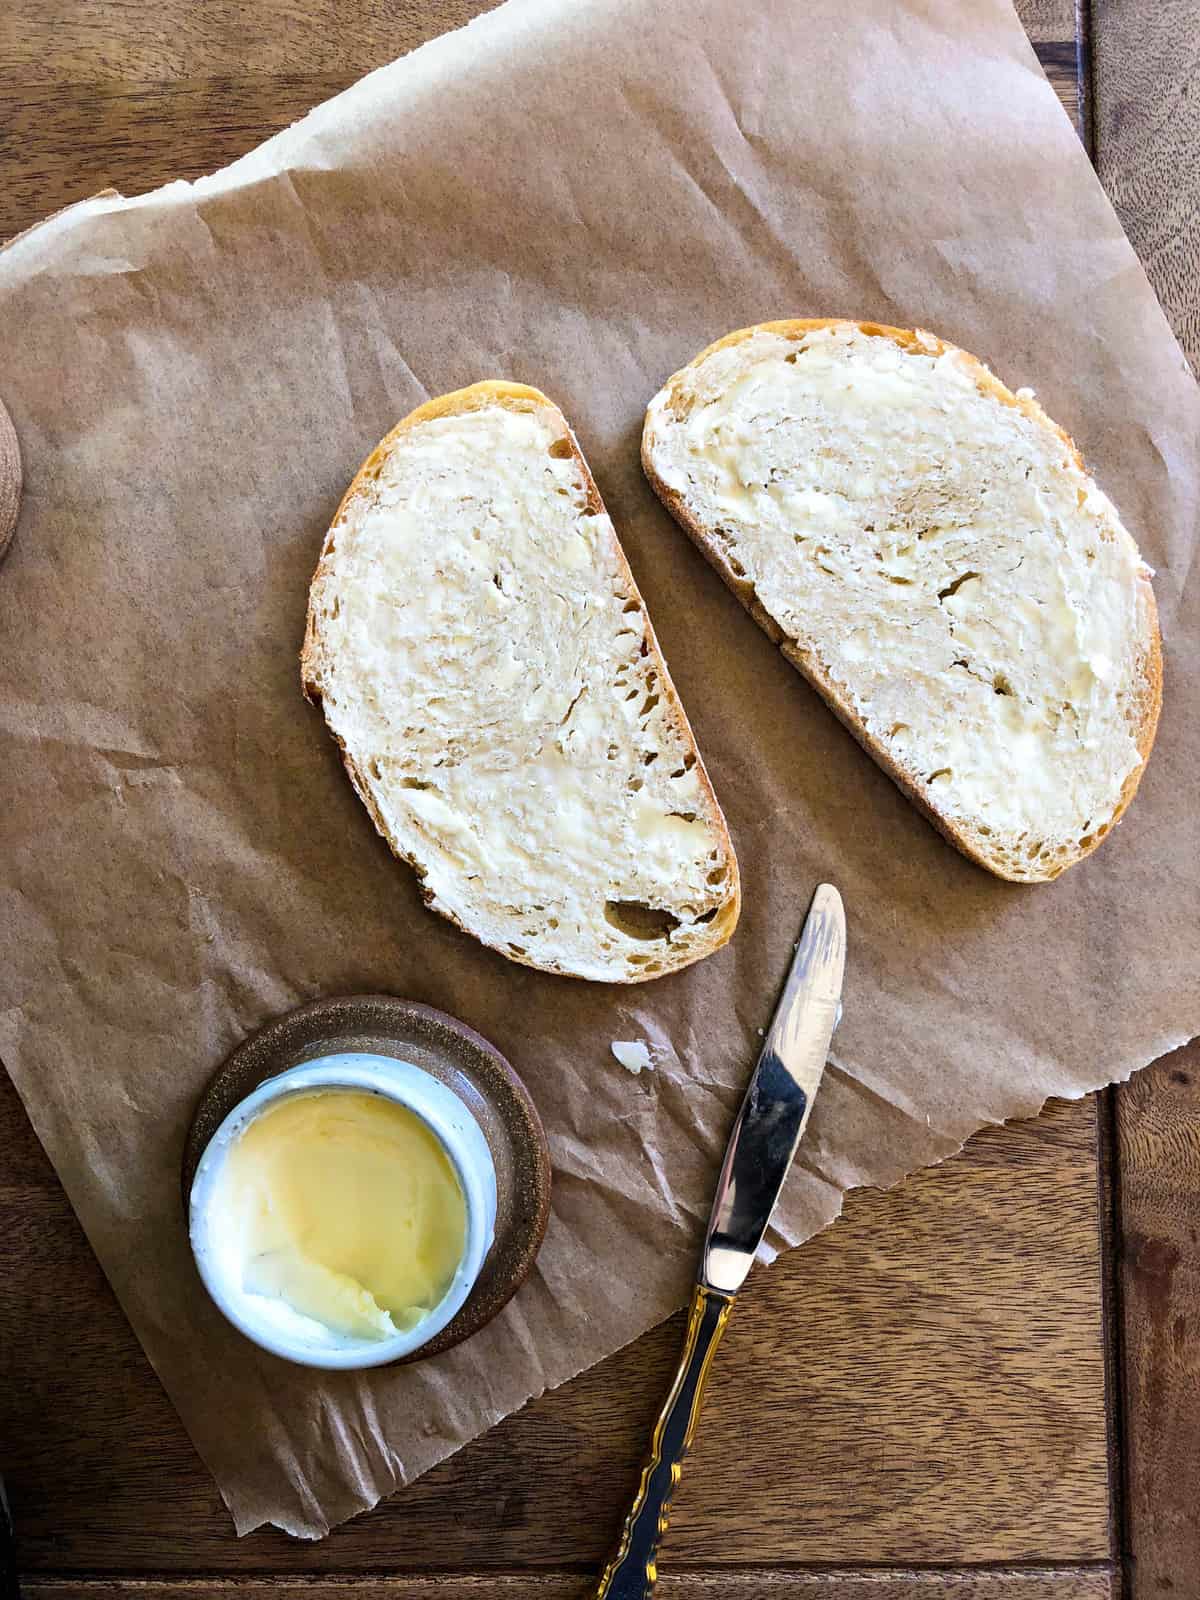 Slather each side of the bread with butter